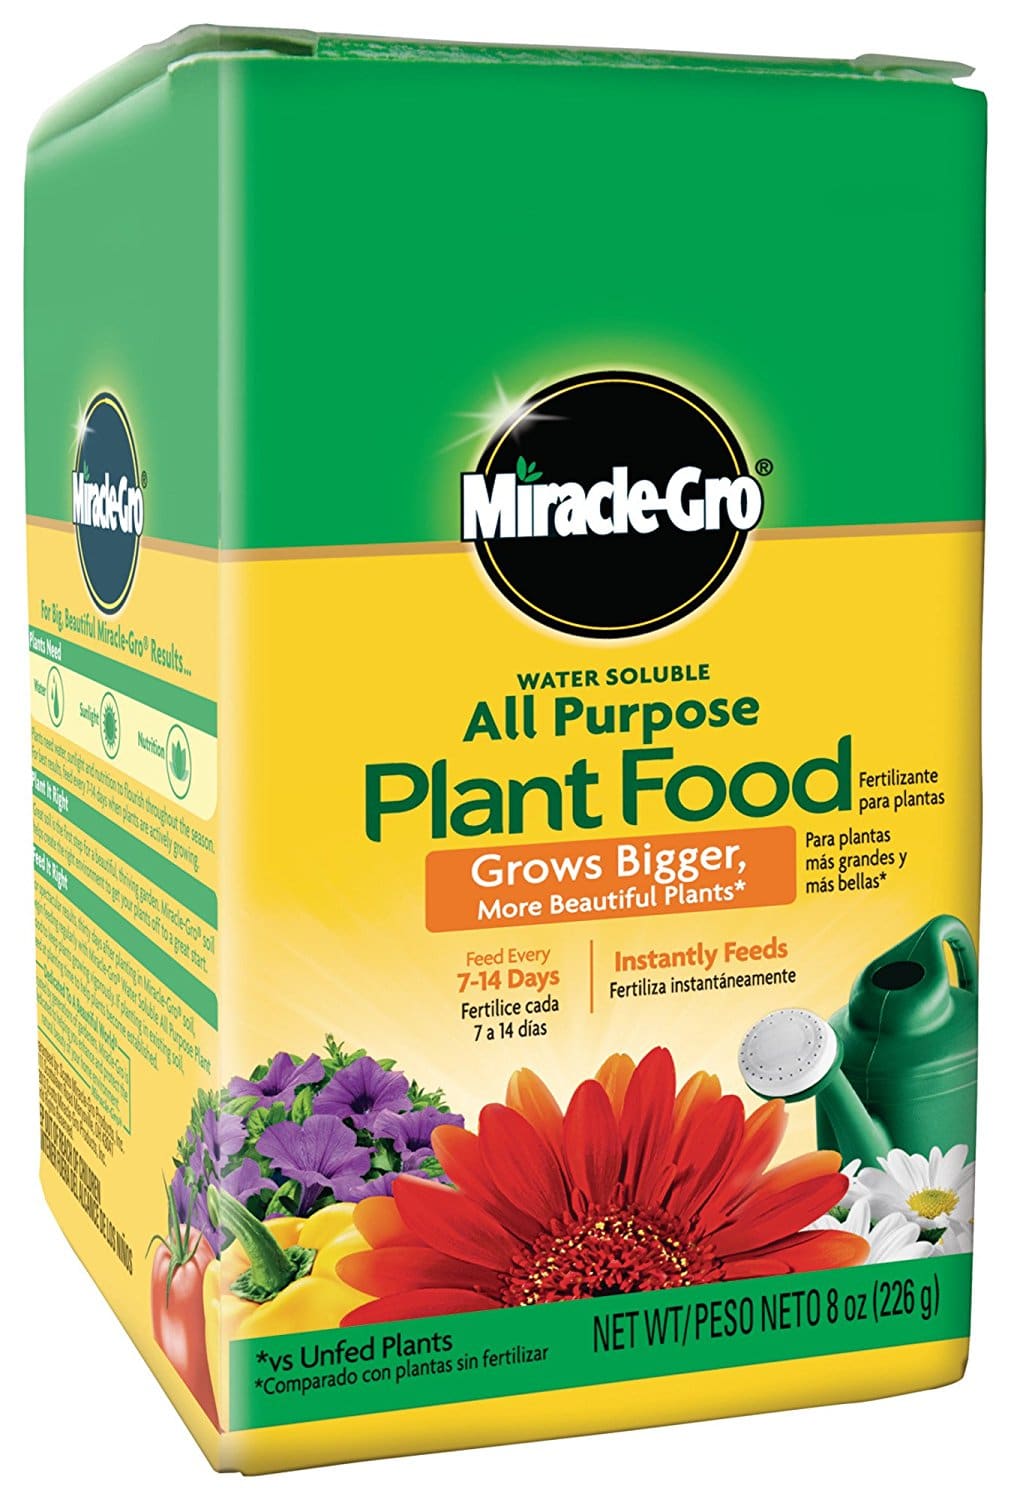 Miracle-Gro Water Soluble All Purpose Plant Food, best potting soil, best potting mix, soil brands, best potting soil brands, best potting soil brands for vegetables, best soil for potted plants, organic potting soil, best potting soil for indoor plants, best organic potting soil, best potting soil for vegetables, best potting mix for vegetables, organic potting soil reviews, top rated potting soil, soil brand, what is the best potting mix, what is the best potting soil, best price on potting soil, the best potting soil, potting soil reviews, potting soil. best potting soil, well draining potting soil, what is potting soil, best soil for potted plants, what is potting soil made out of, dirt for plants, sterile potting soil, soil for indoor plants, when to use potting soil, indoor potting soil vs outdoor potting soil, high quality potting soil, best potting soil for indoor plants, acidic potting soil, what is potting mix, potting soul, best potting mix, potting mix vs potting soil, best potting soil for flowers